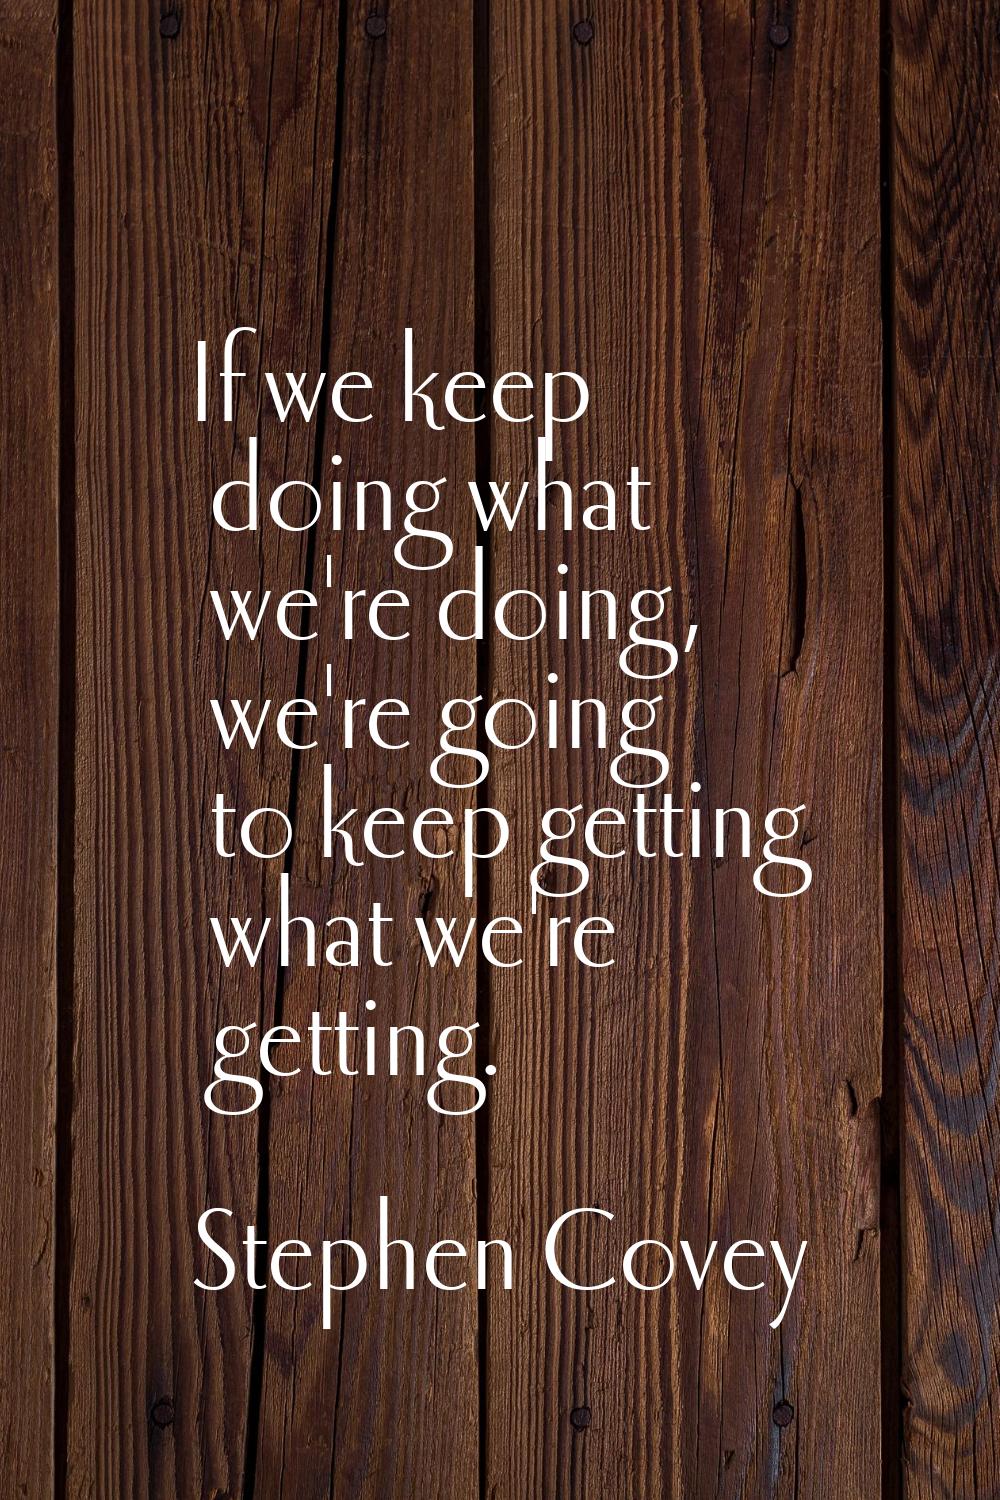 If we keep doing what we're doing, we're going to keep getting what we're getting.